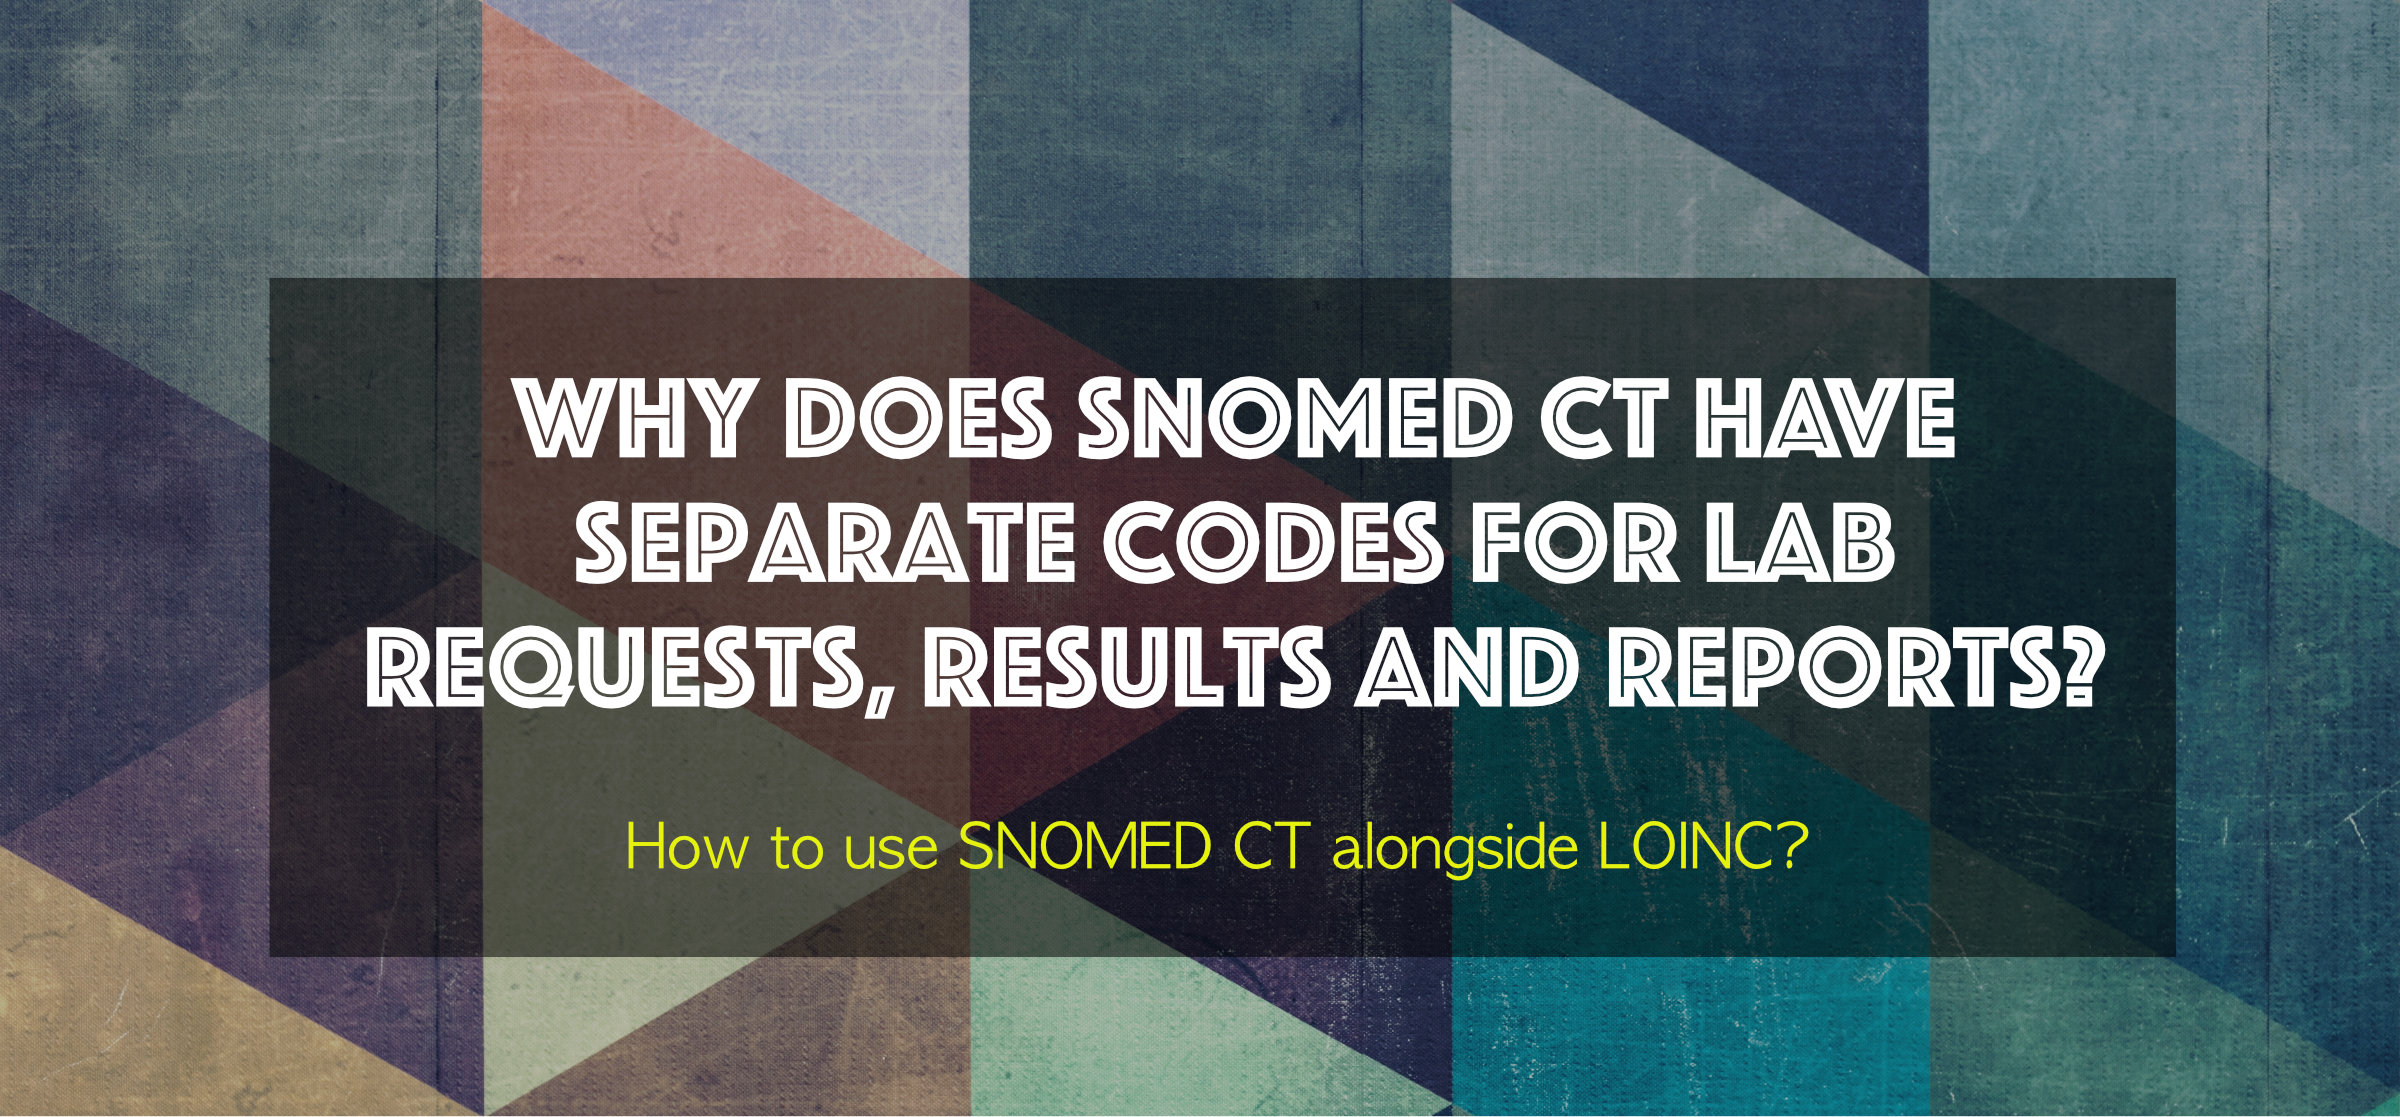 Why does SNOMED CT have separate codes for Lab Test Requests, Results and Reports?